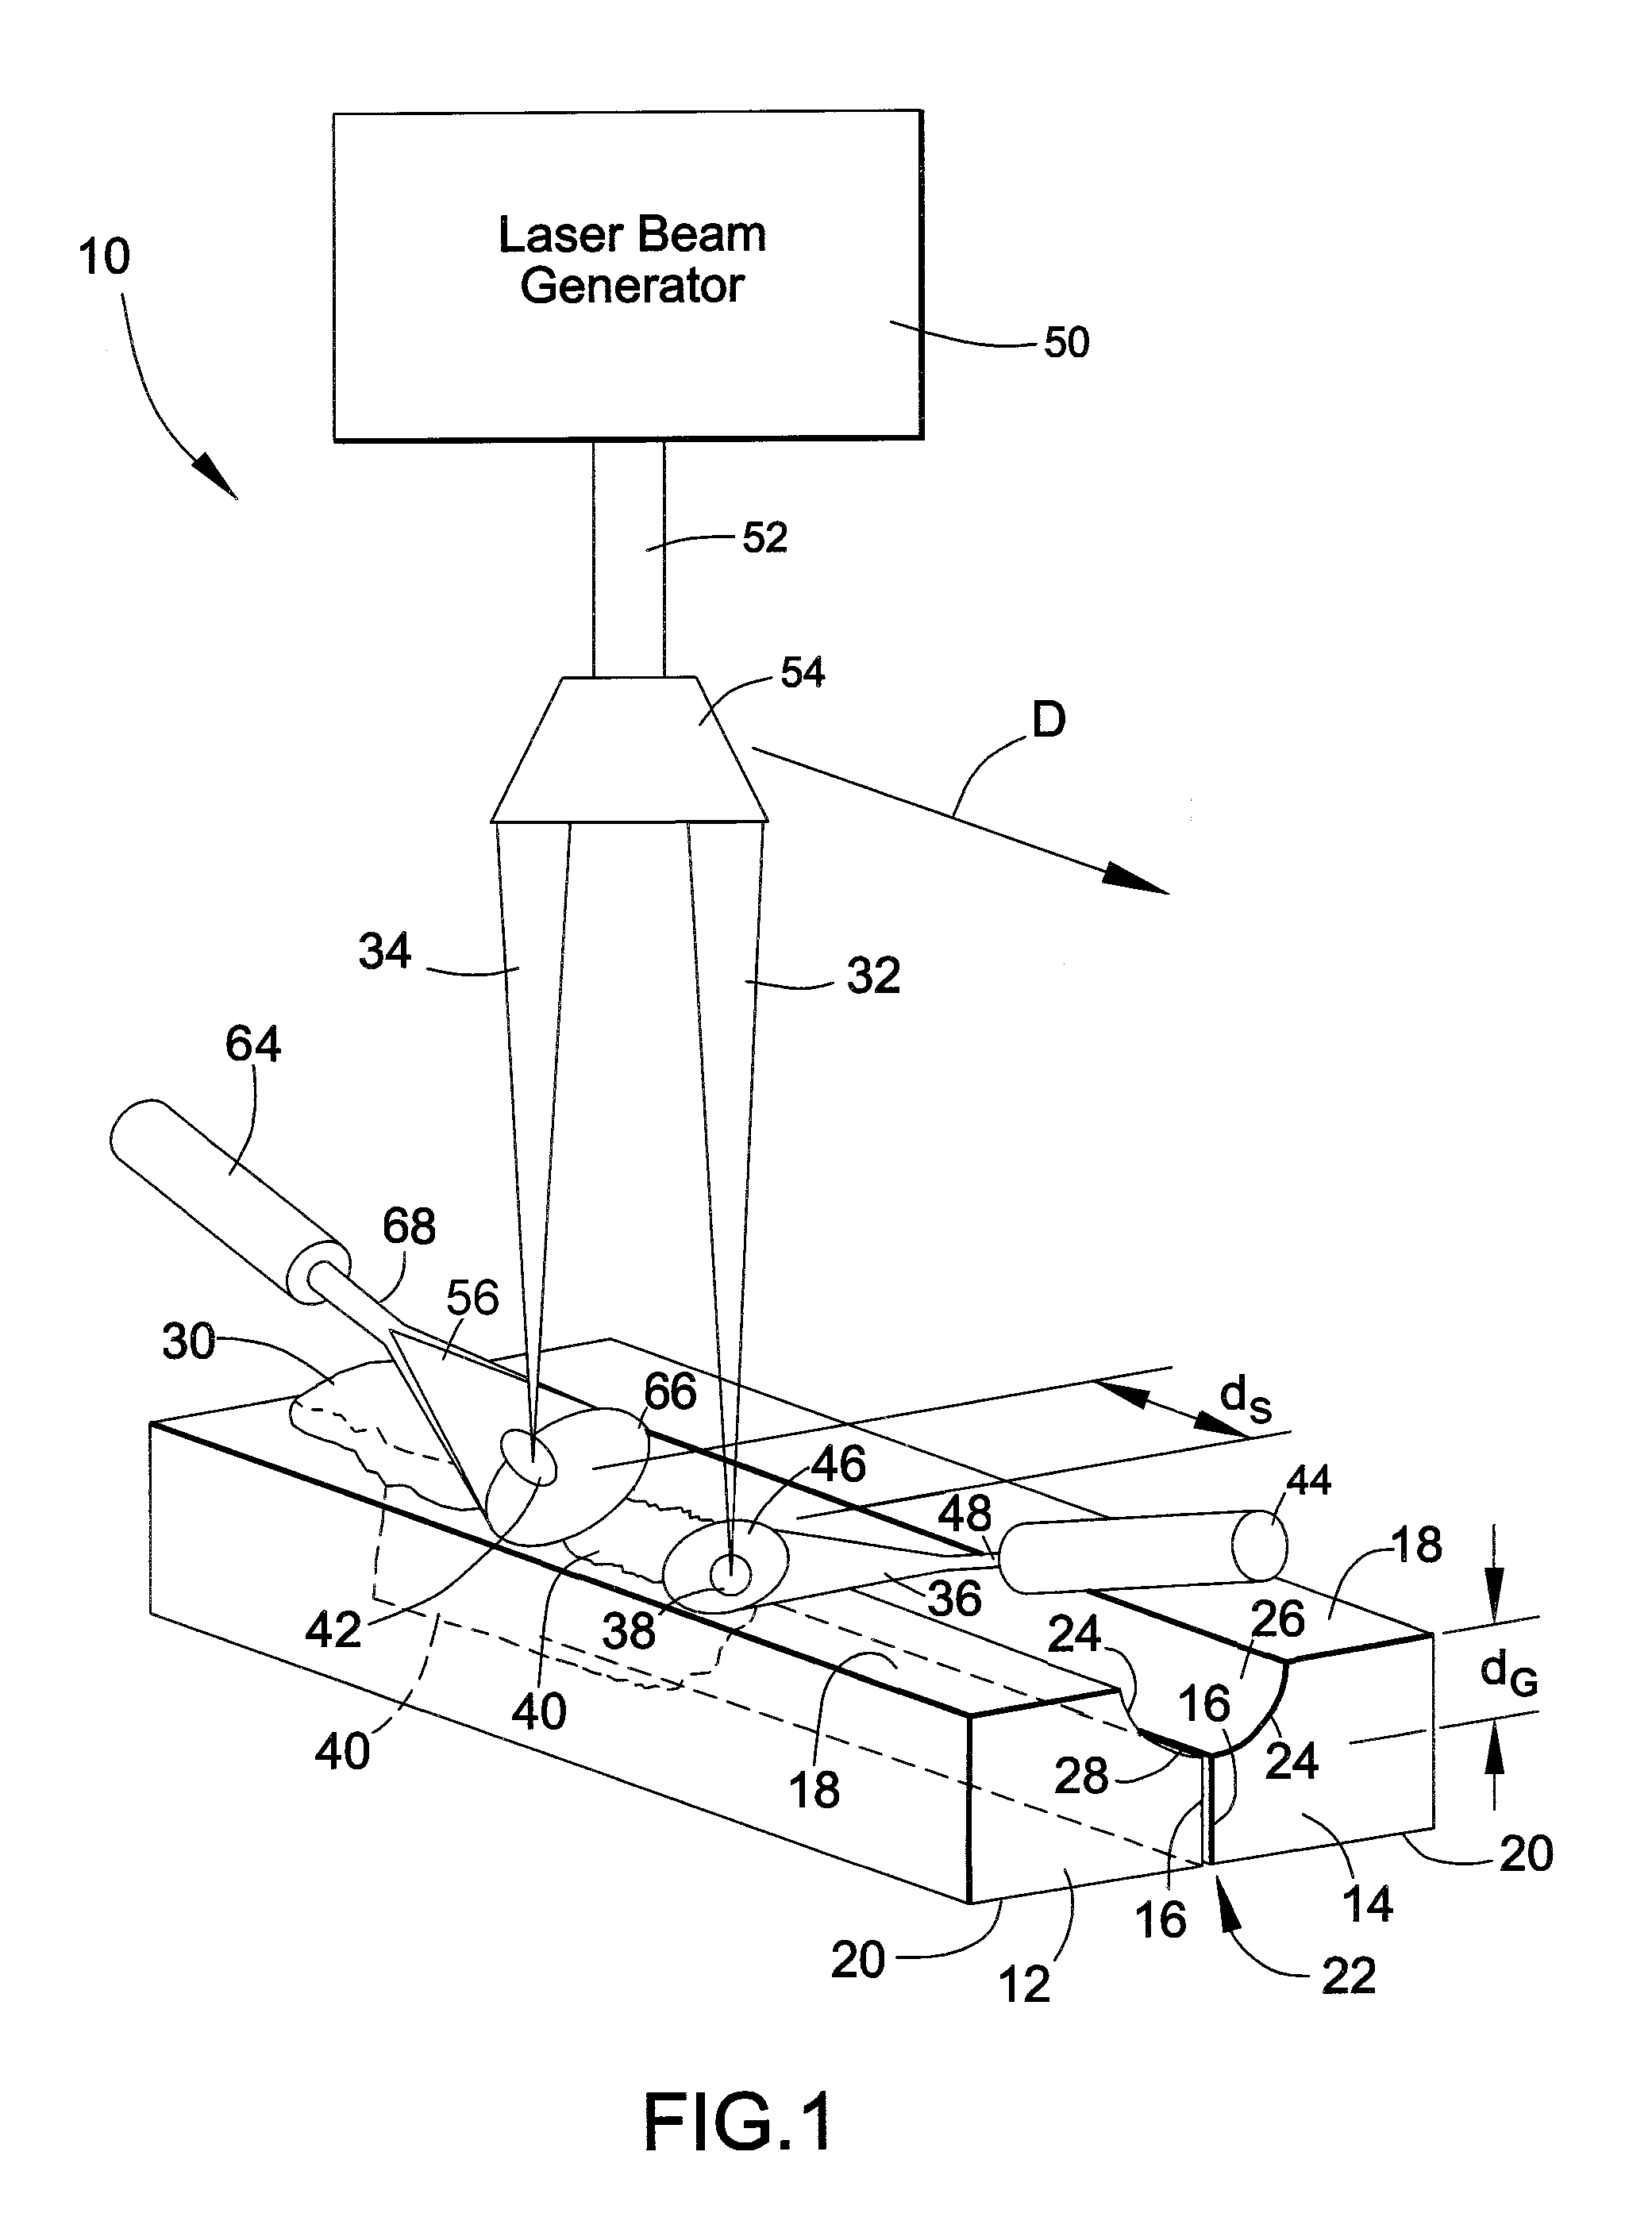 Hybrid laser arc welding process and apparatus